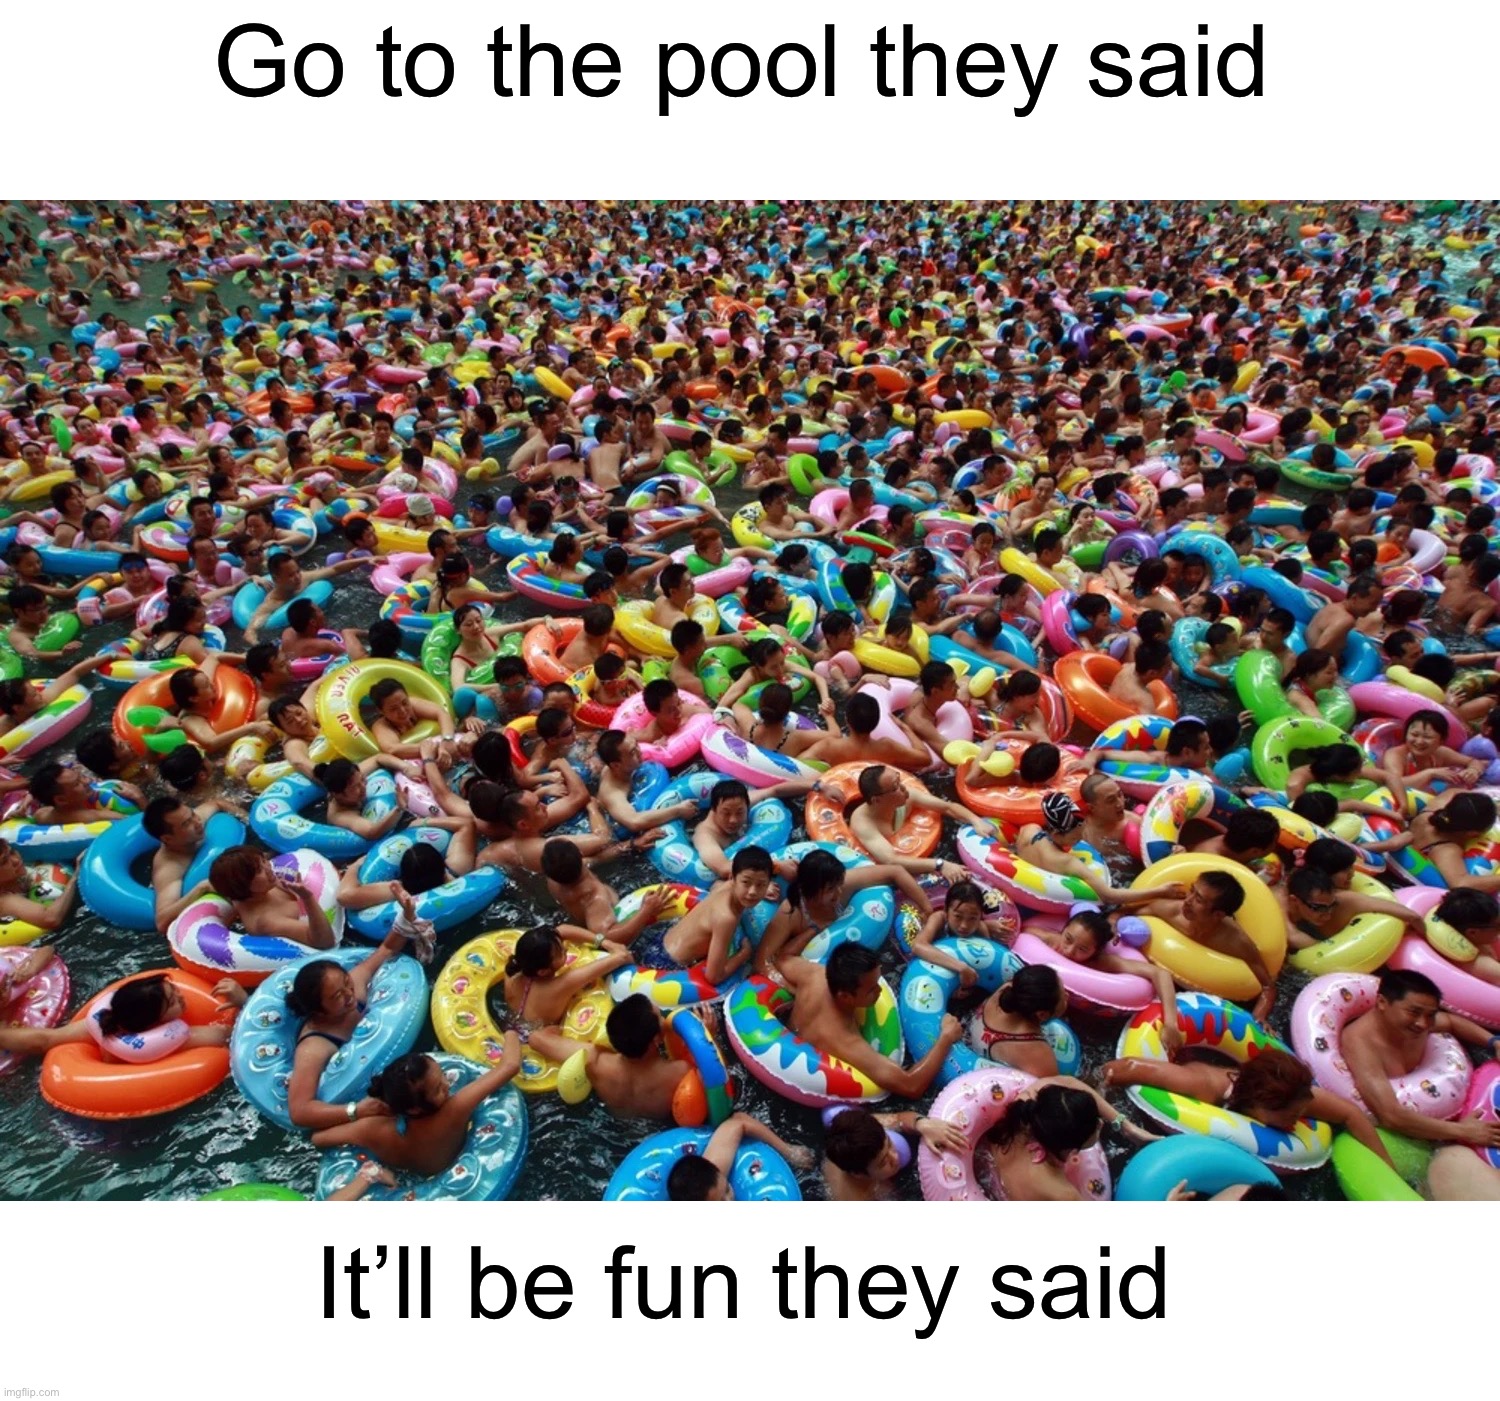 Doesn’t look very fun to me | Go to the pool they said; It’ll be fun they said | image tagged in memes,funny,true story,funny memes,summer,pool | made w/ Imgflip meme maker